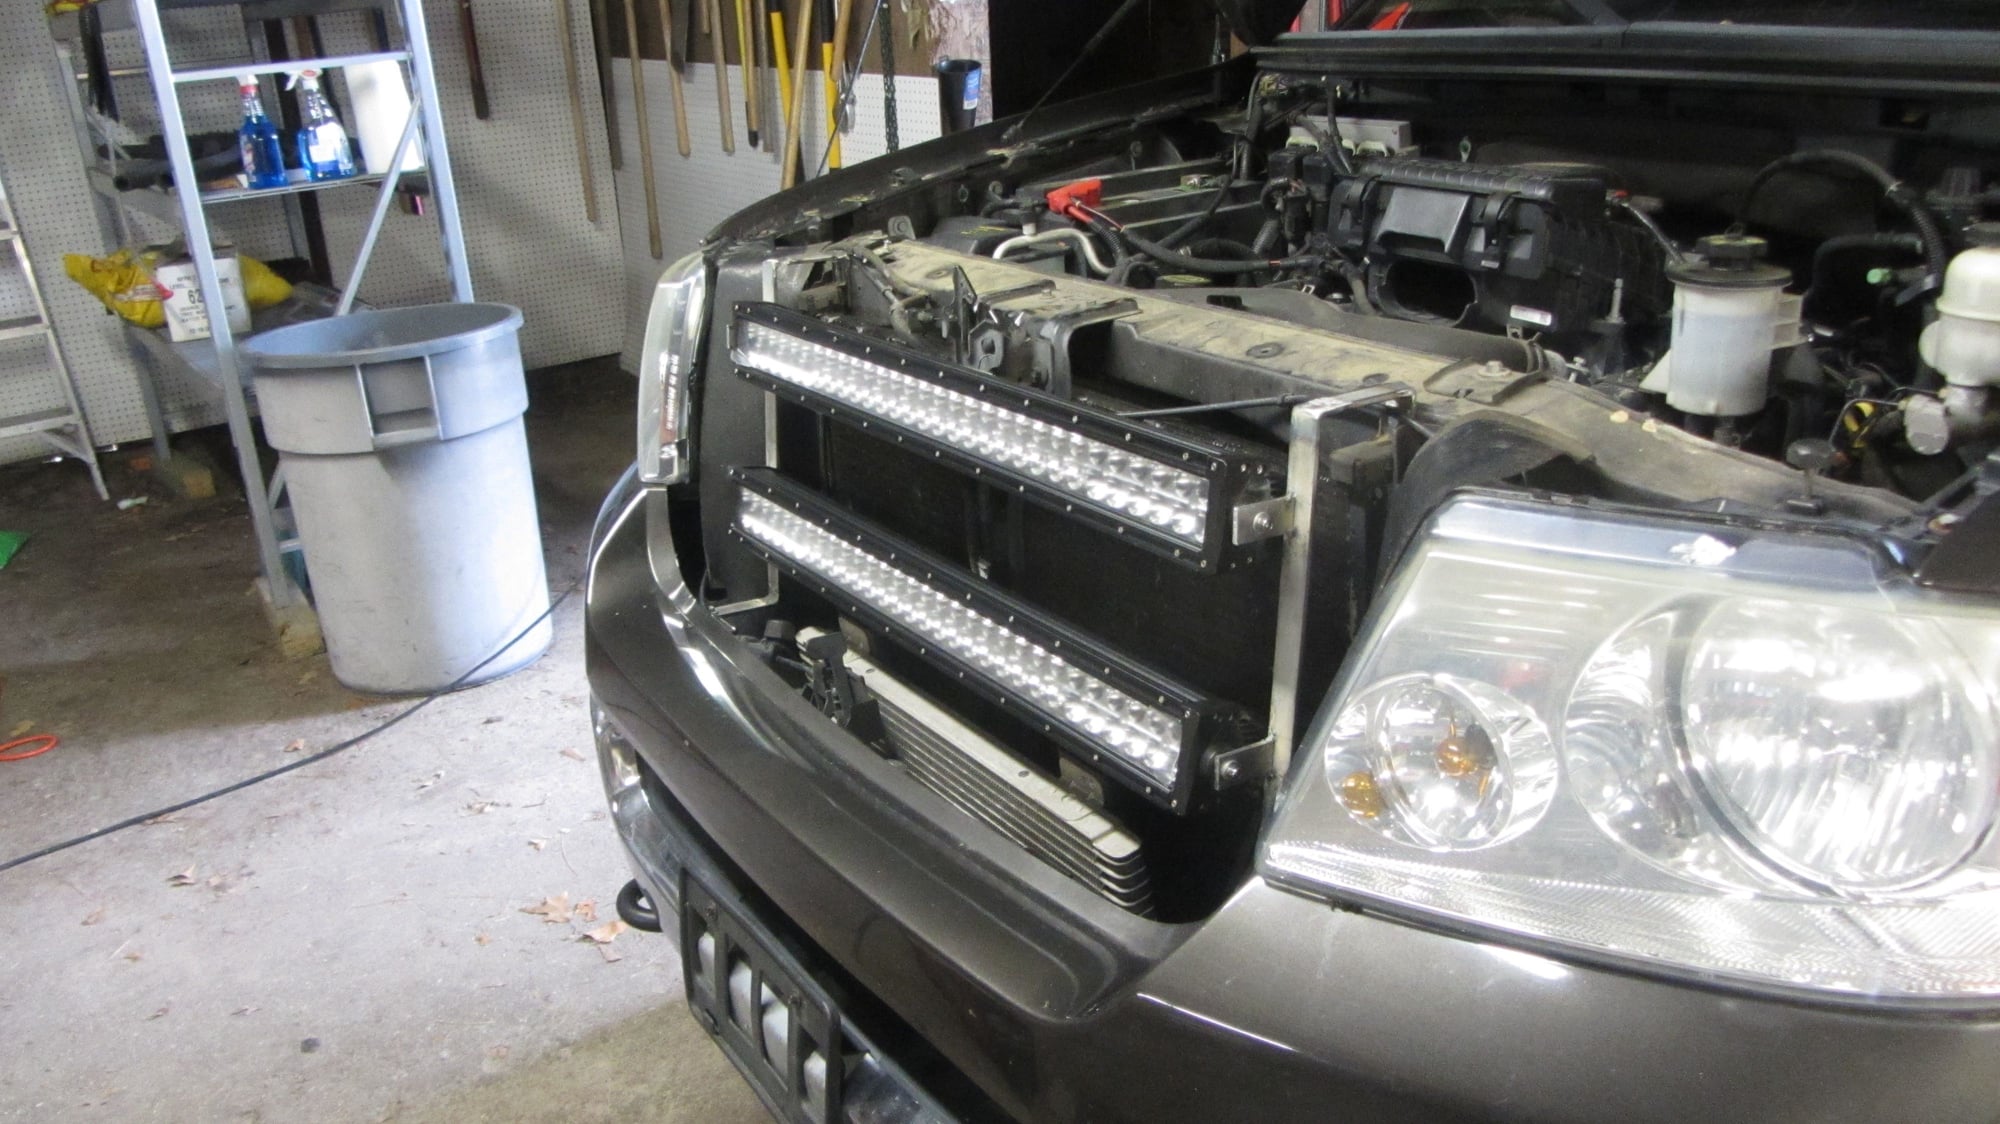 Dual 30" LED behind grille - Page 2 - Ford F150 Forum - Community of Ford Truck Fans 2013 F150 Cooling Fan Stuck On High